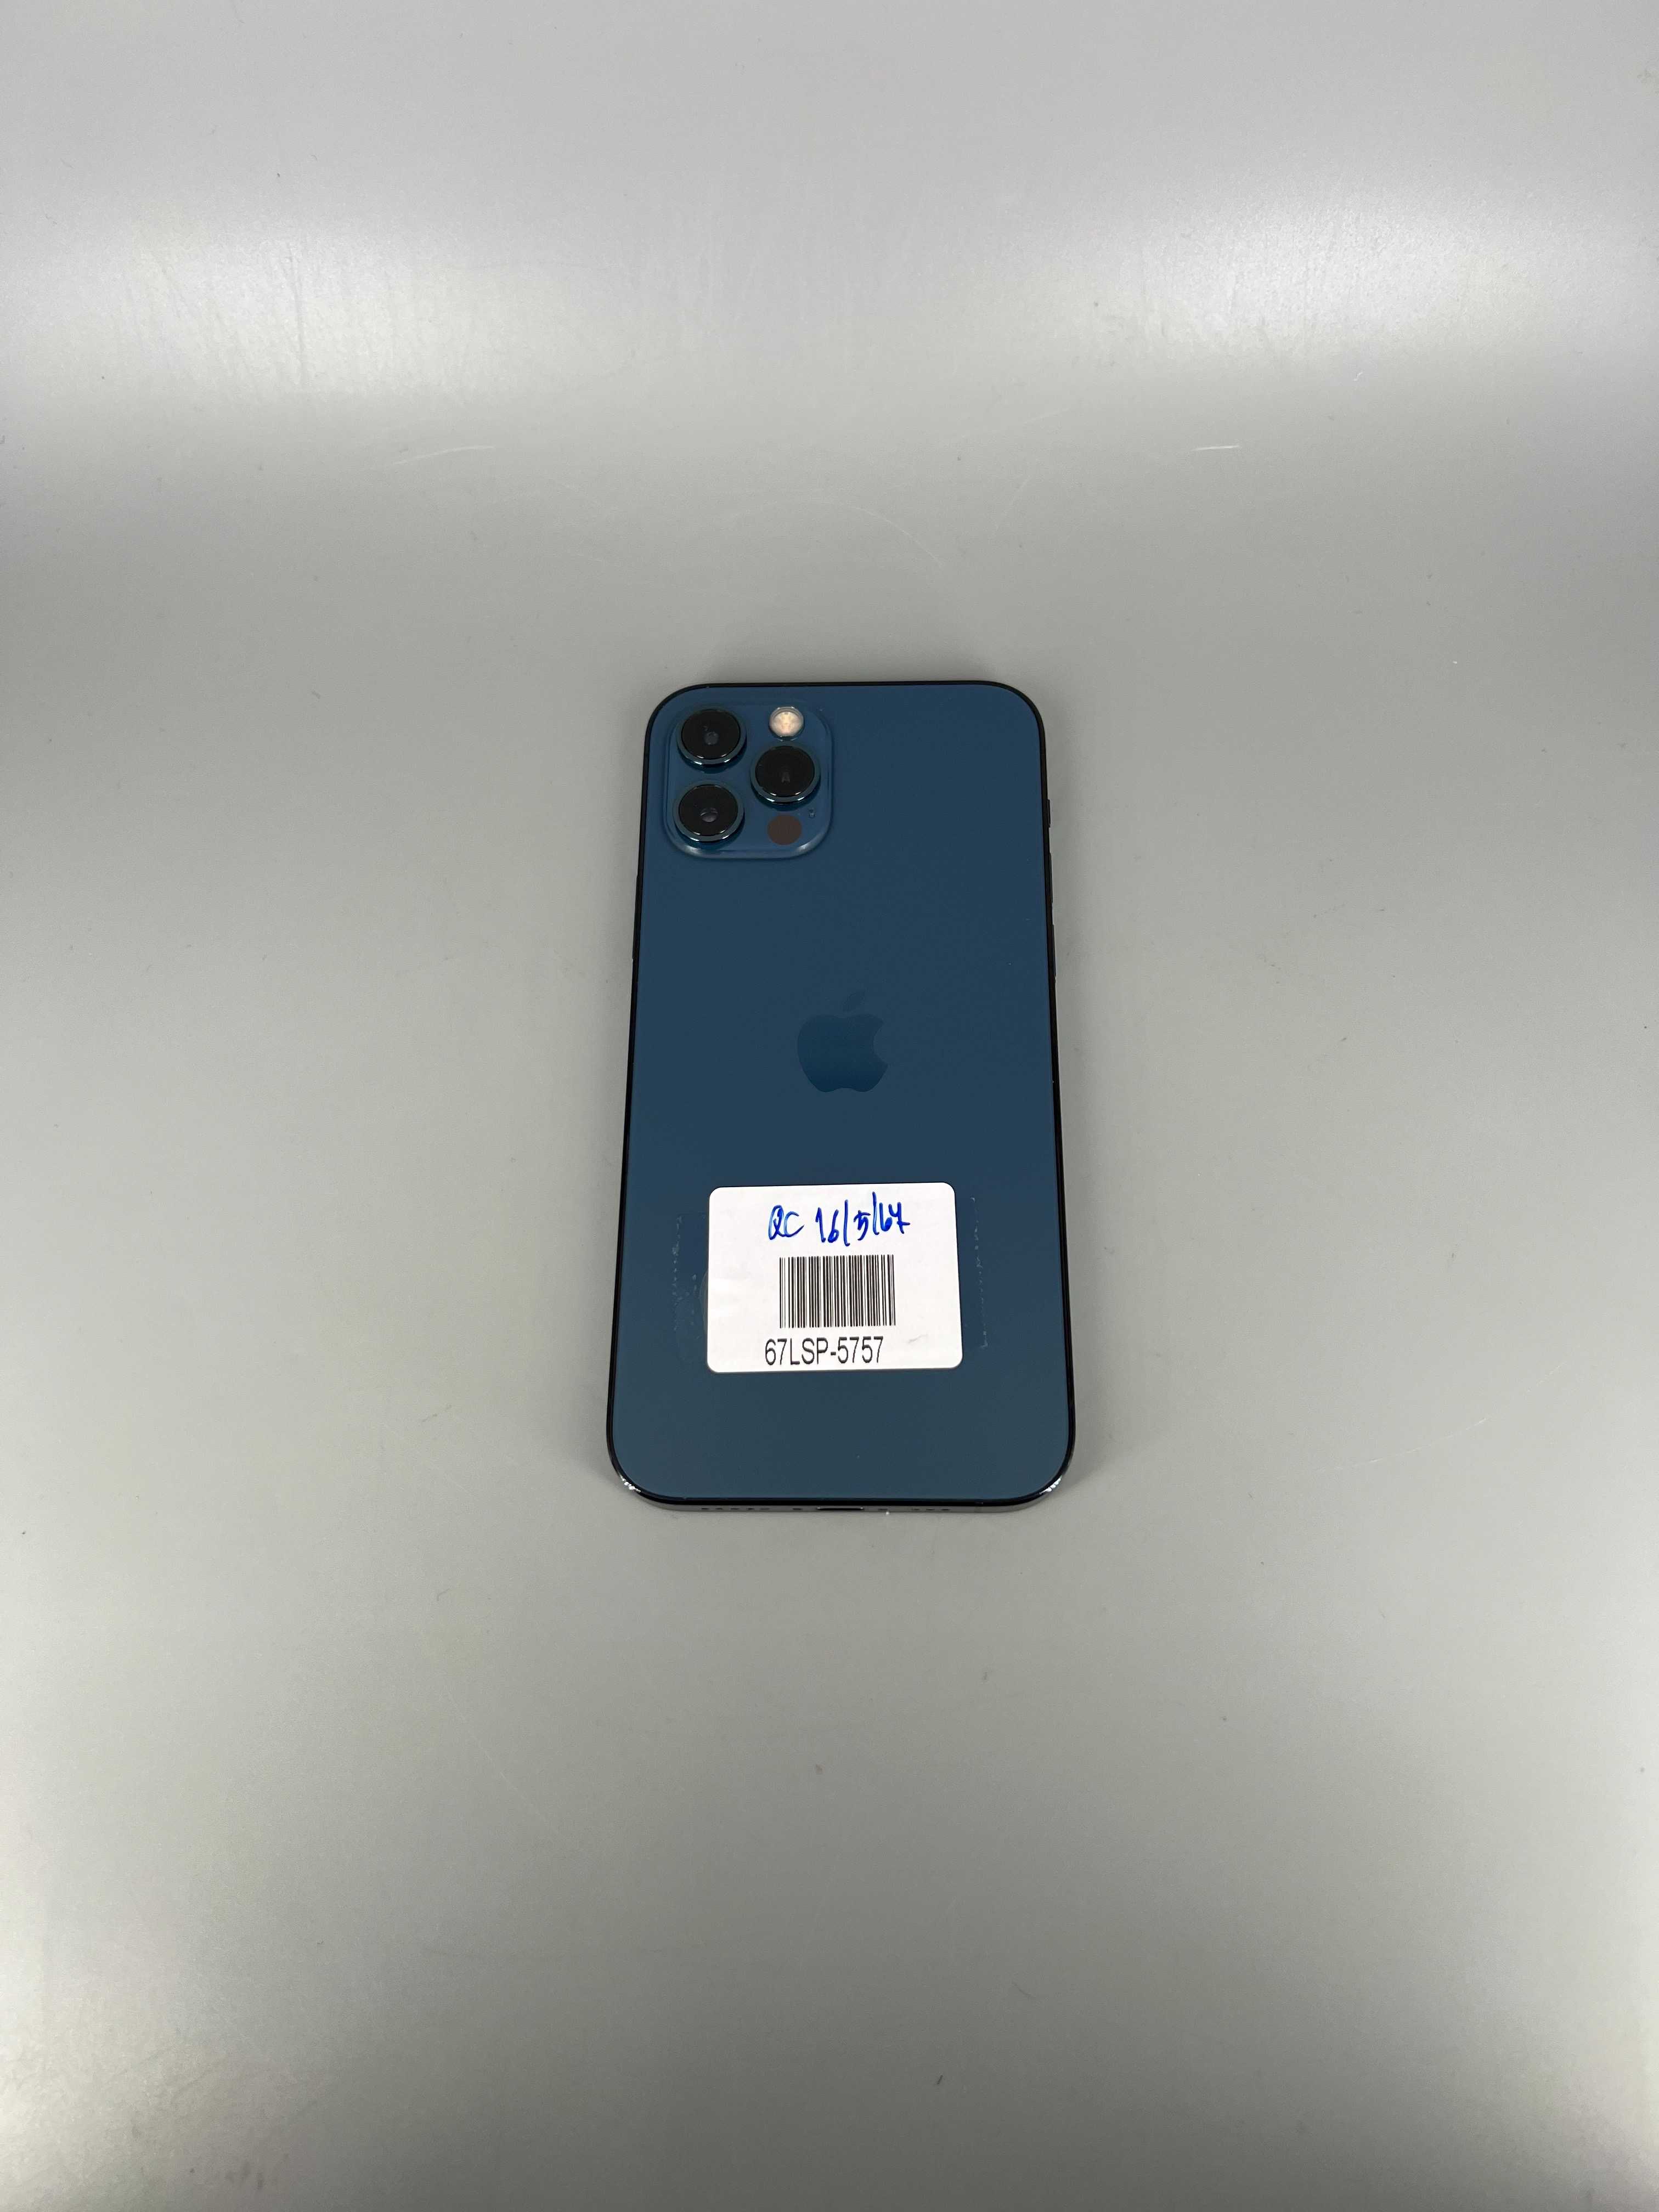 Used iPhone 12 Pro 256GB Pacific Blue 67LSP-5757